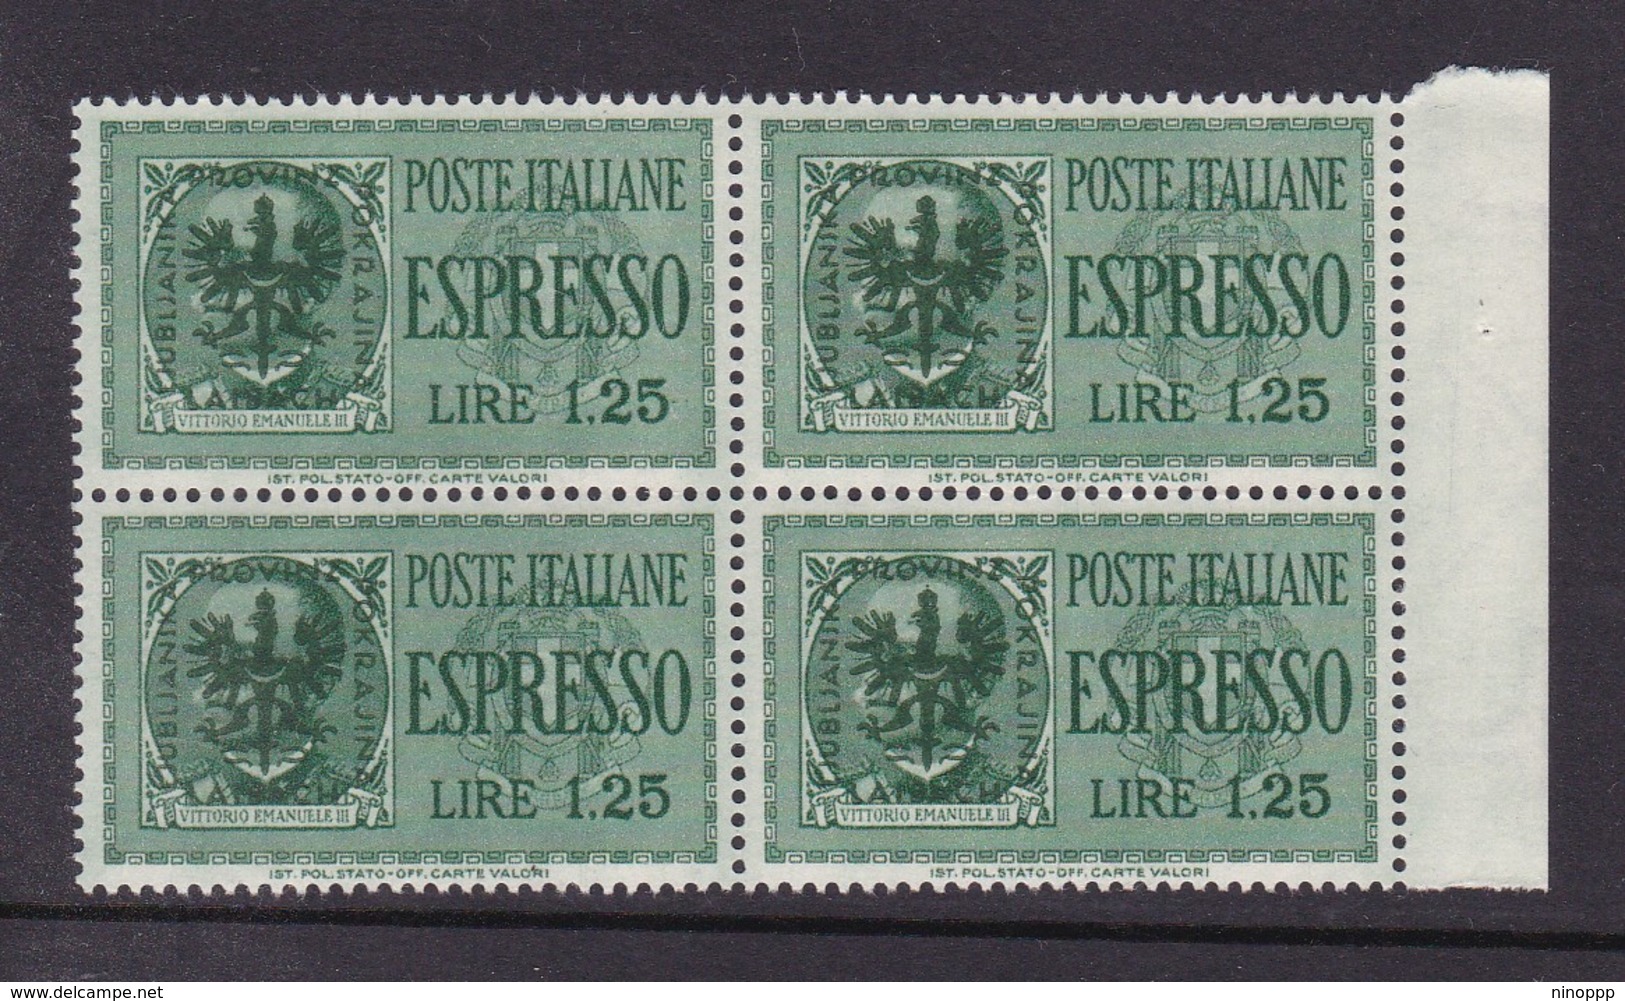 Italy-WWII Occupation-german Occupation Of Lubiana NE1 1944 Special Delivery , Block 4 Mint Never Hinged - Occ. Allemande: Lubiana